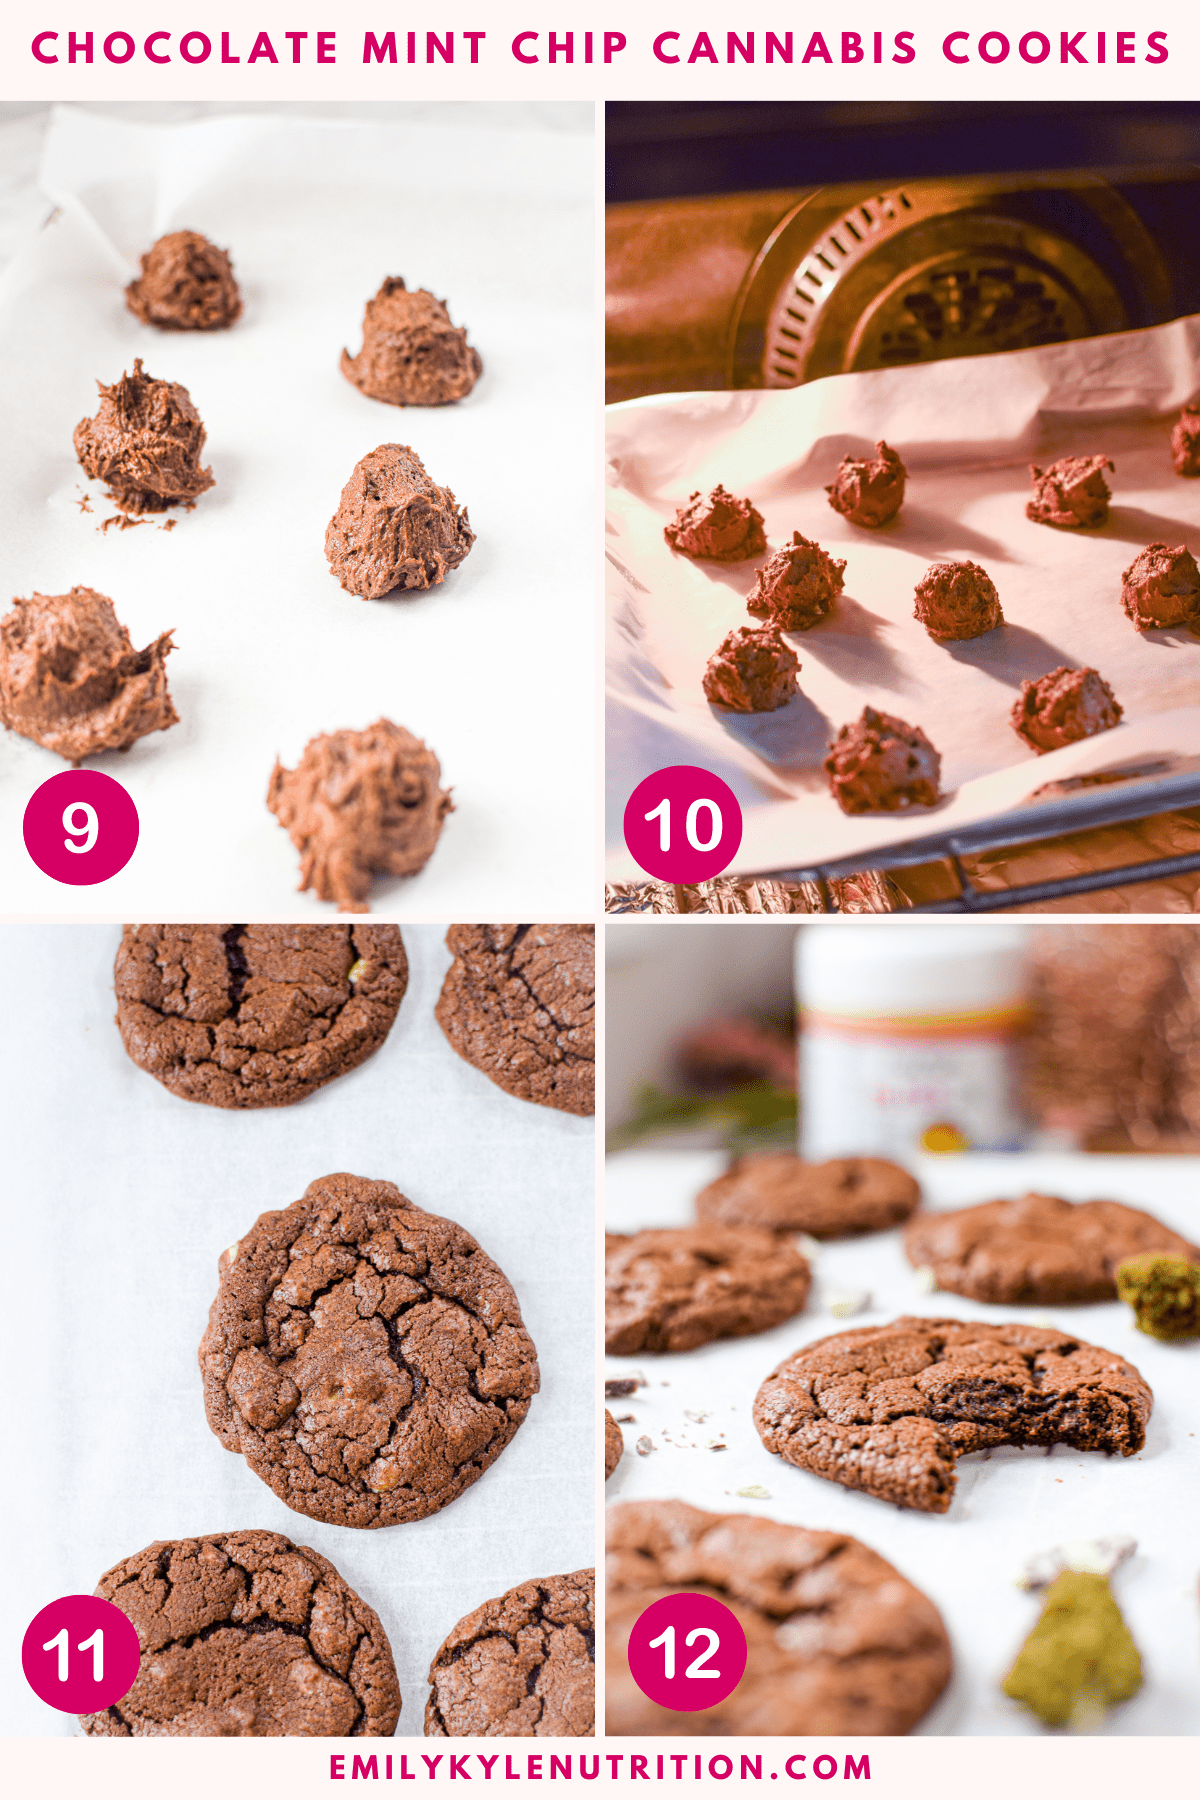 A four step image collage showing how to make chocolate mint chip cannabis cookies.